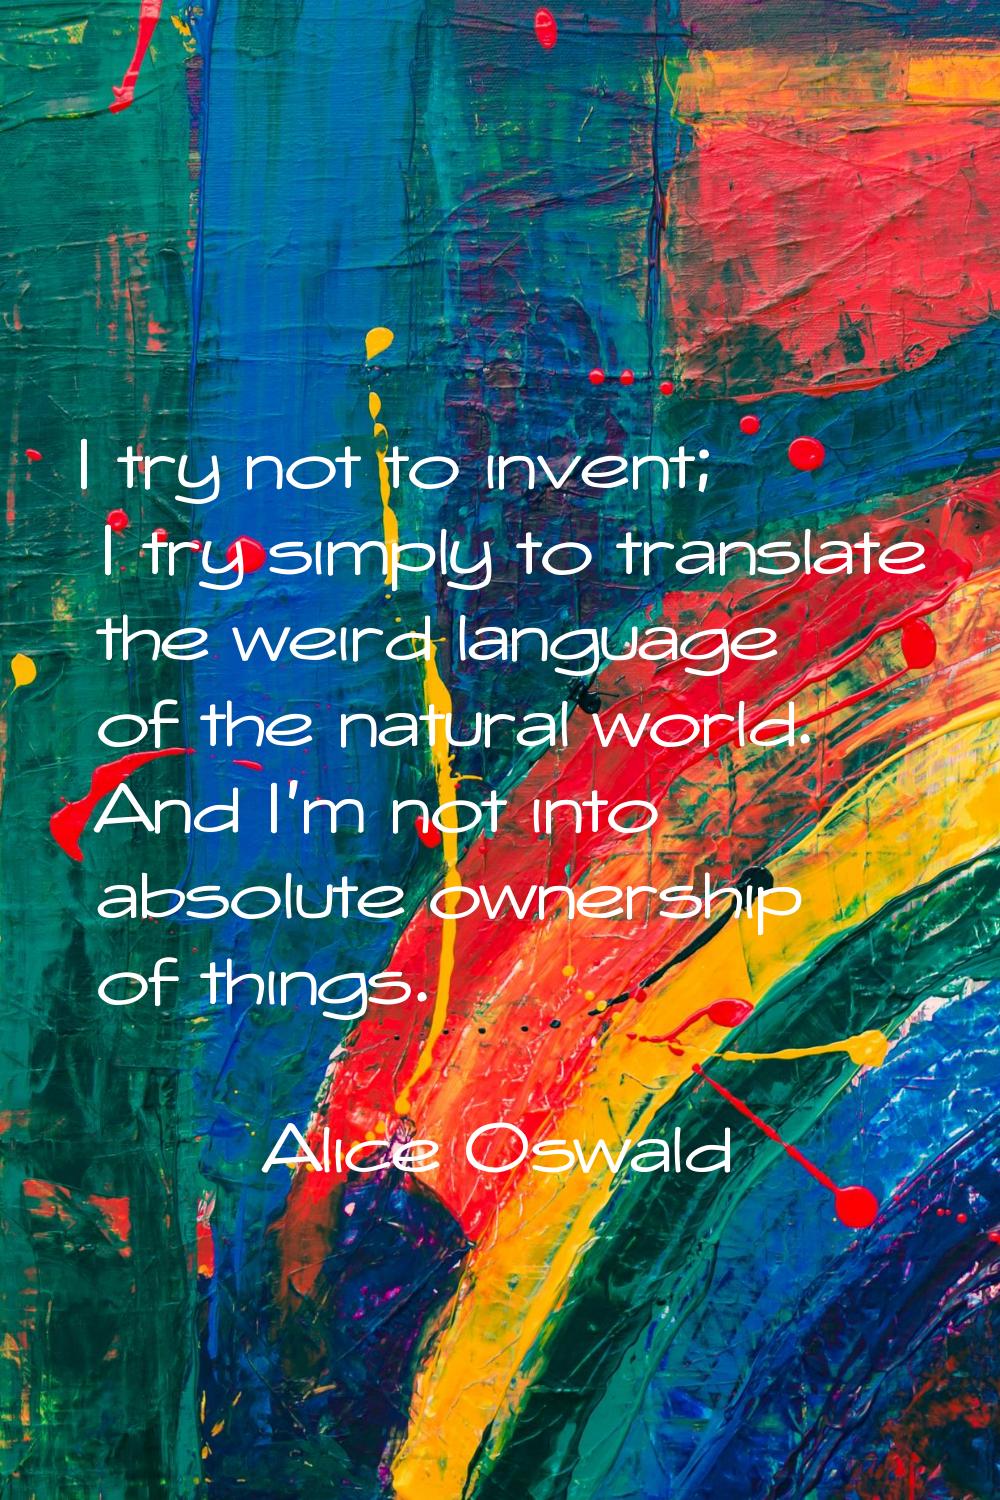 I try not to invent; I try simply to translate the weird language of the natural world. And I'm not